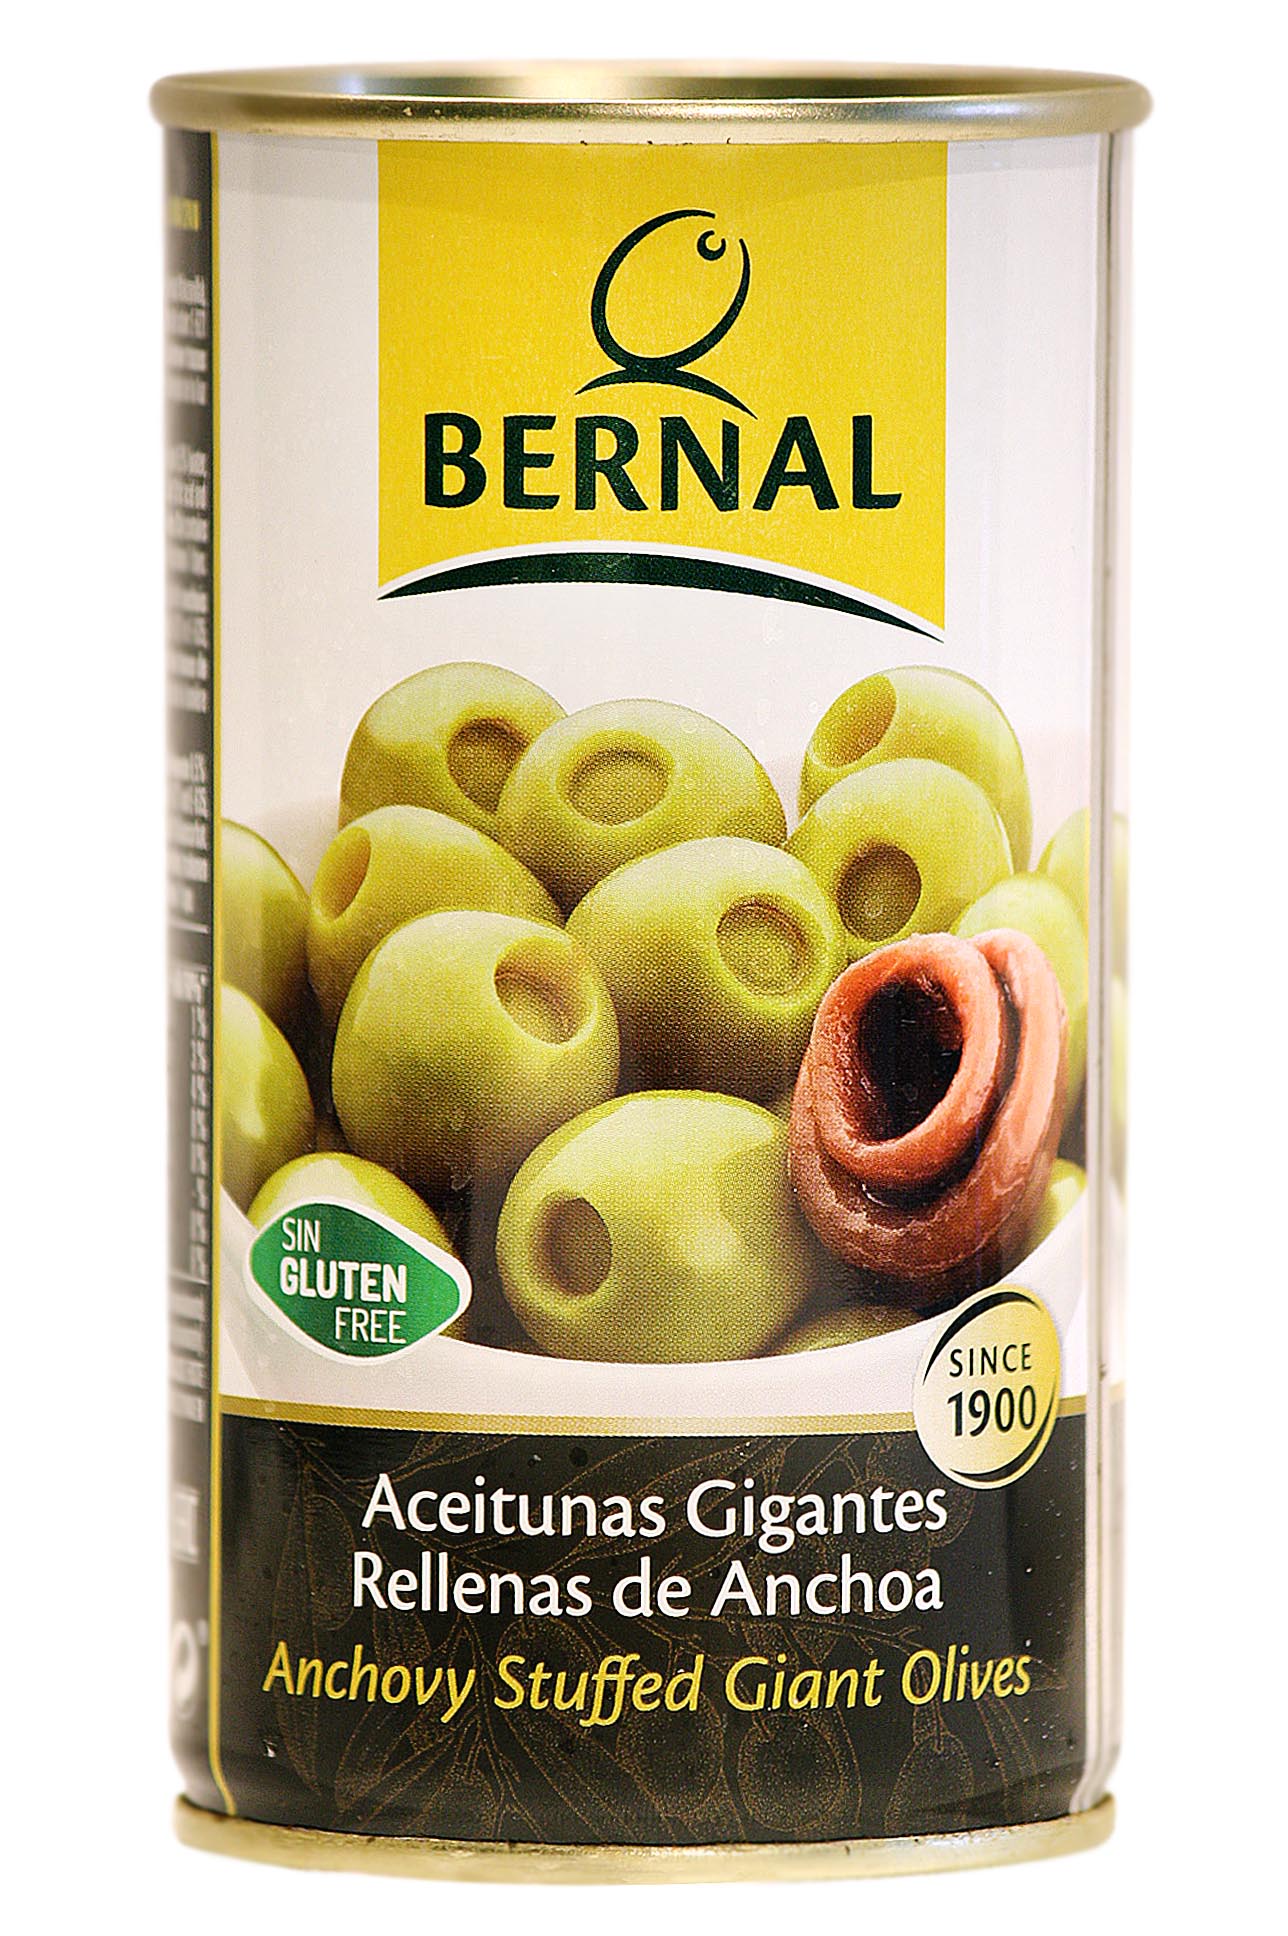 Bernal CV400-Anchovy stuffed giant olives